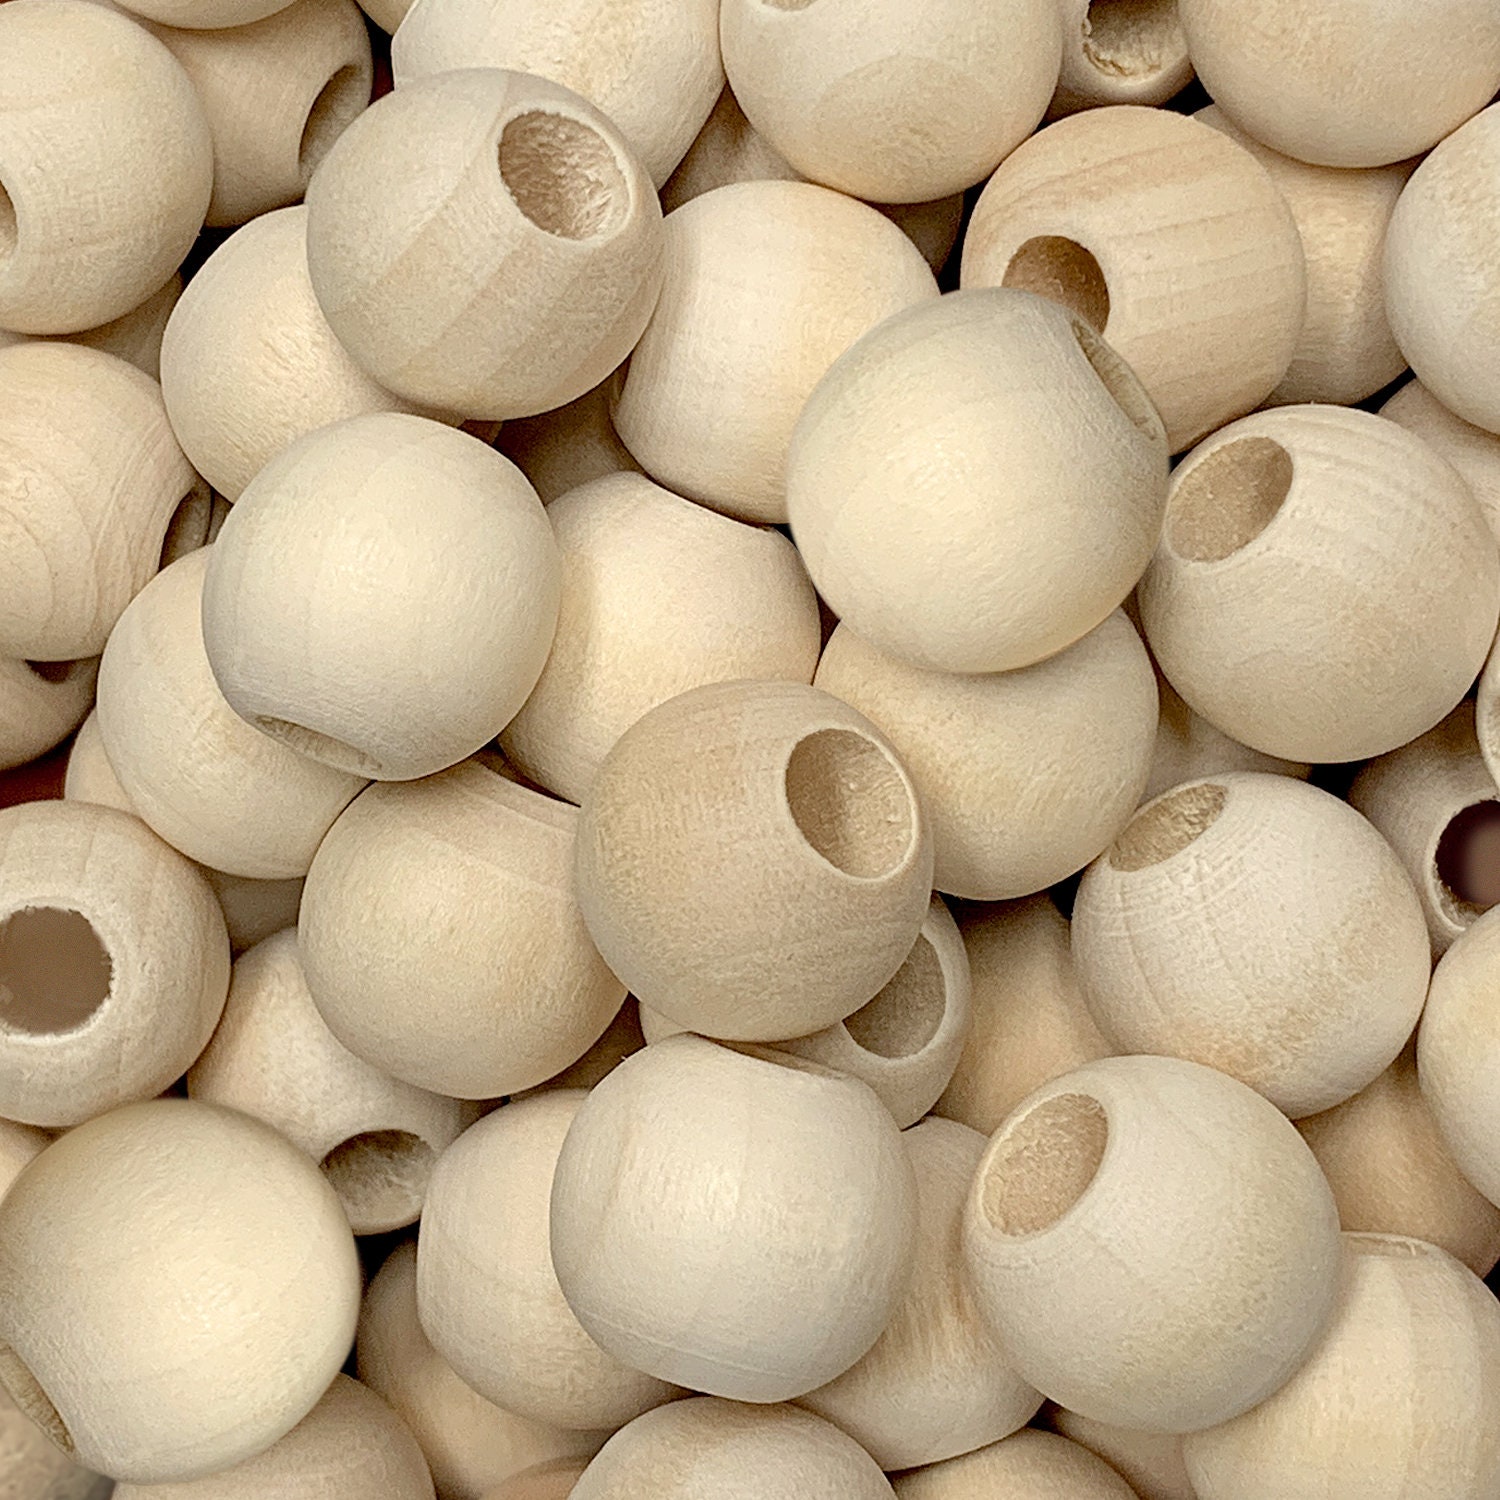 Incraftables Natural Wooden Beads for Crafts 530pcs (8mm, 10mm, 15mm, 20mm & 25mm). Best Wood Beads for Crafts with Holes. Bulk Unfinished DIY Large